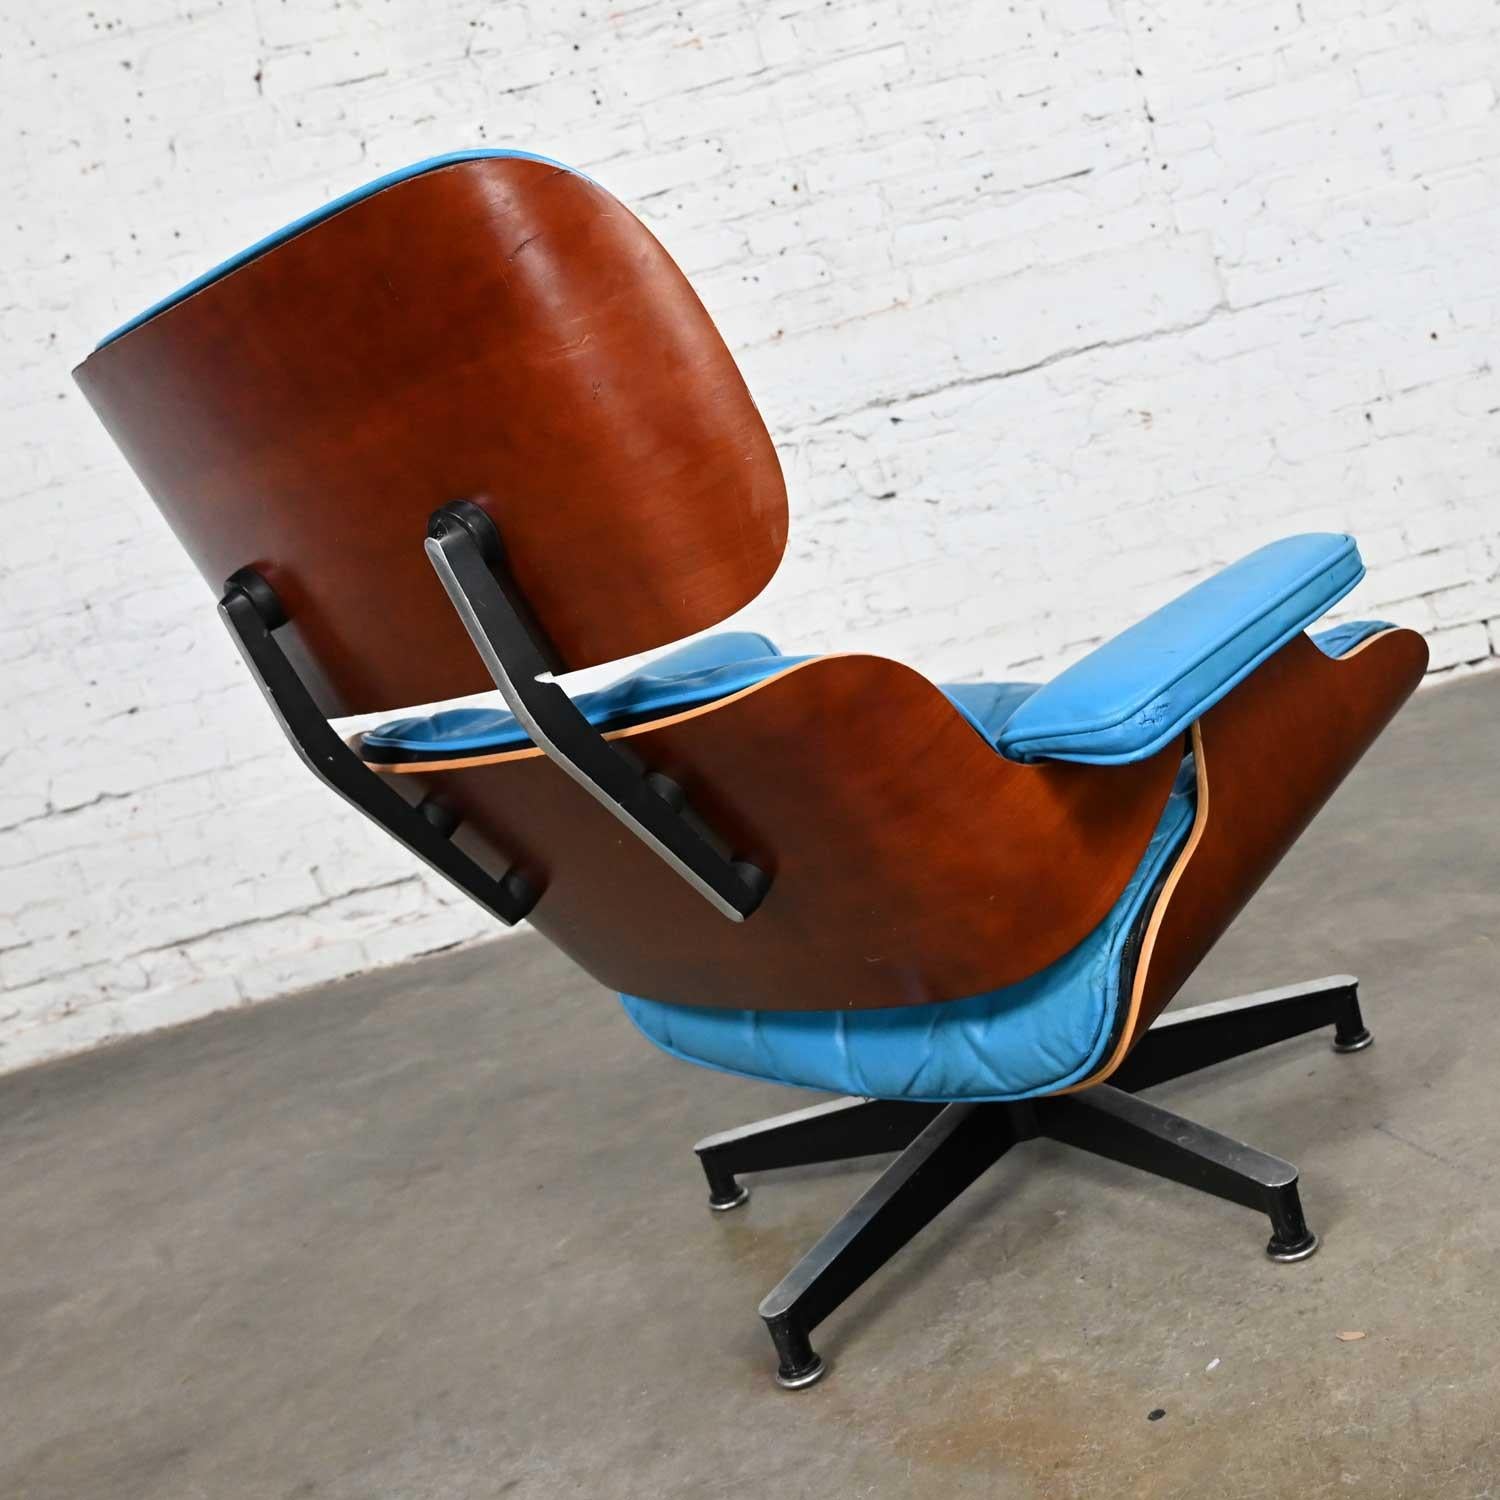 Eames 670 Lounge Chair 671 Ottoman Blue Leather Walnut Rosewood Herman Miller 1